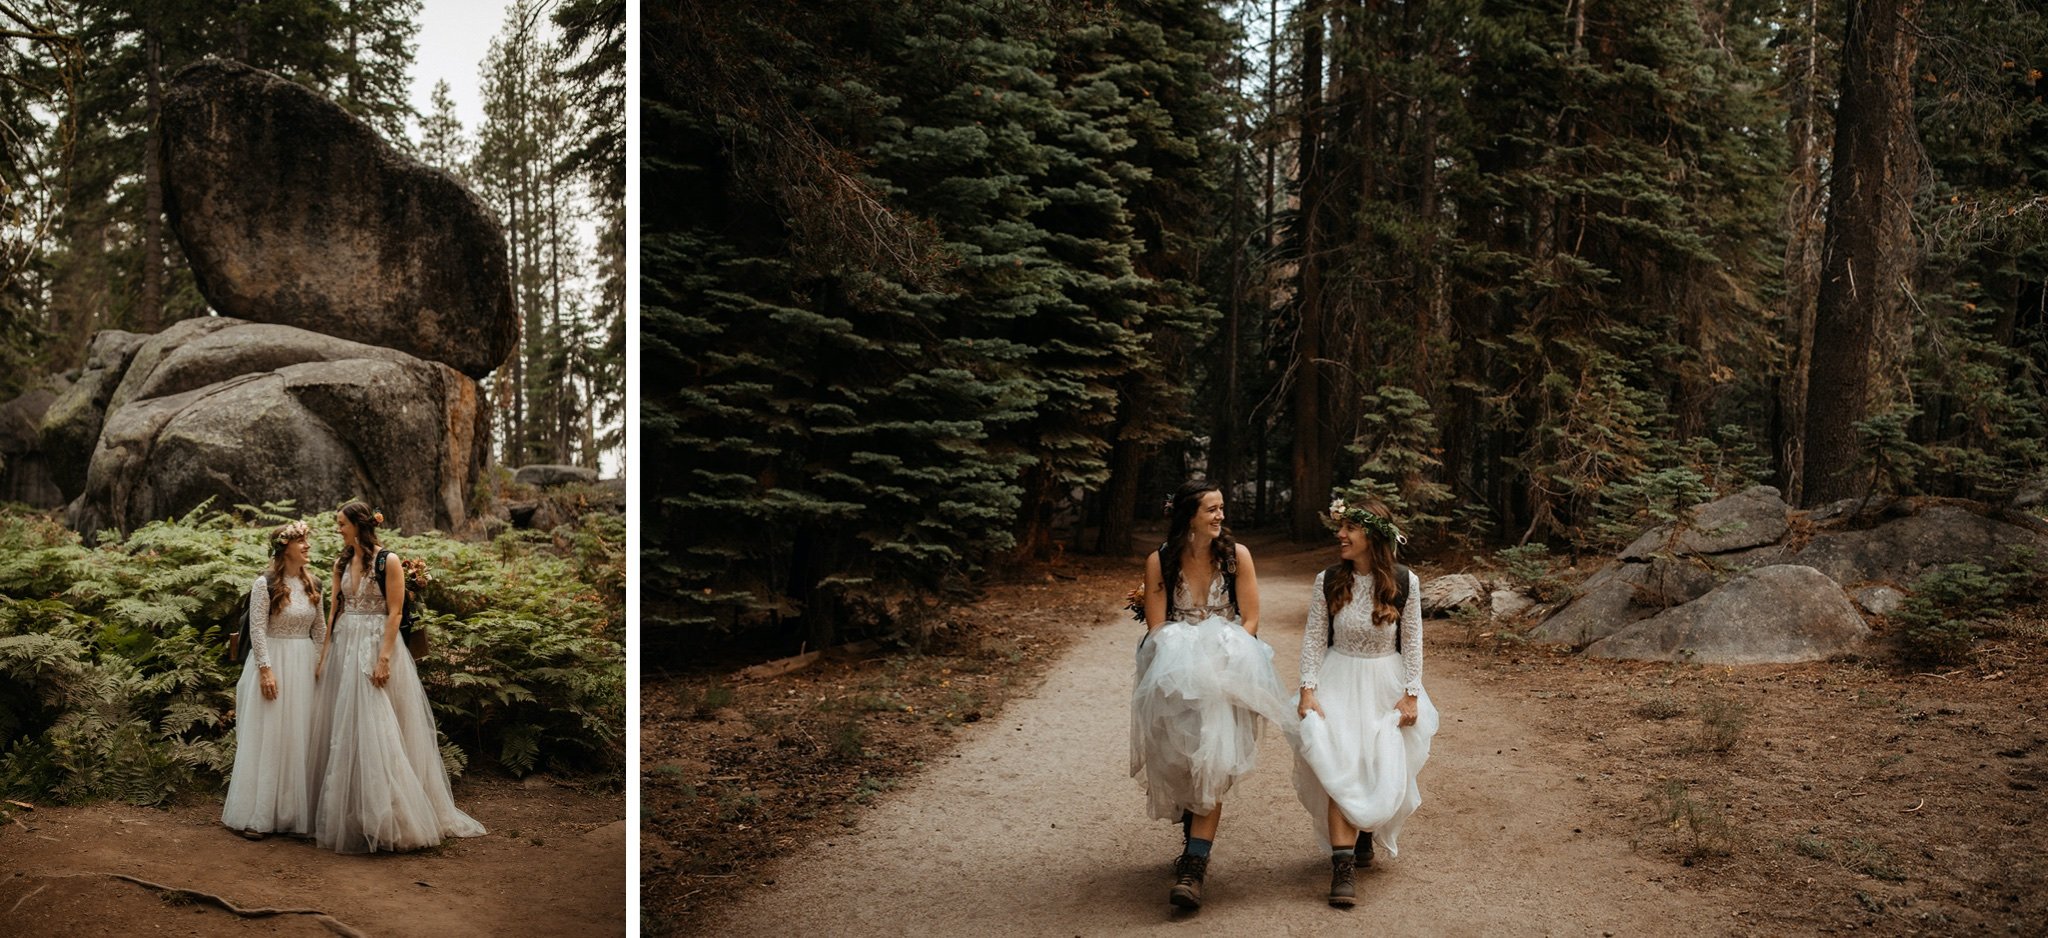 Yosemite National Park Elopement with Two Brides-Will Khoury30.jpg